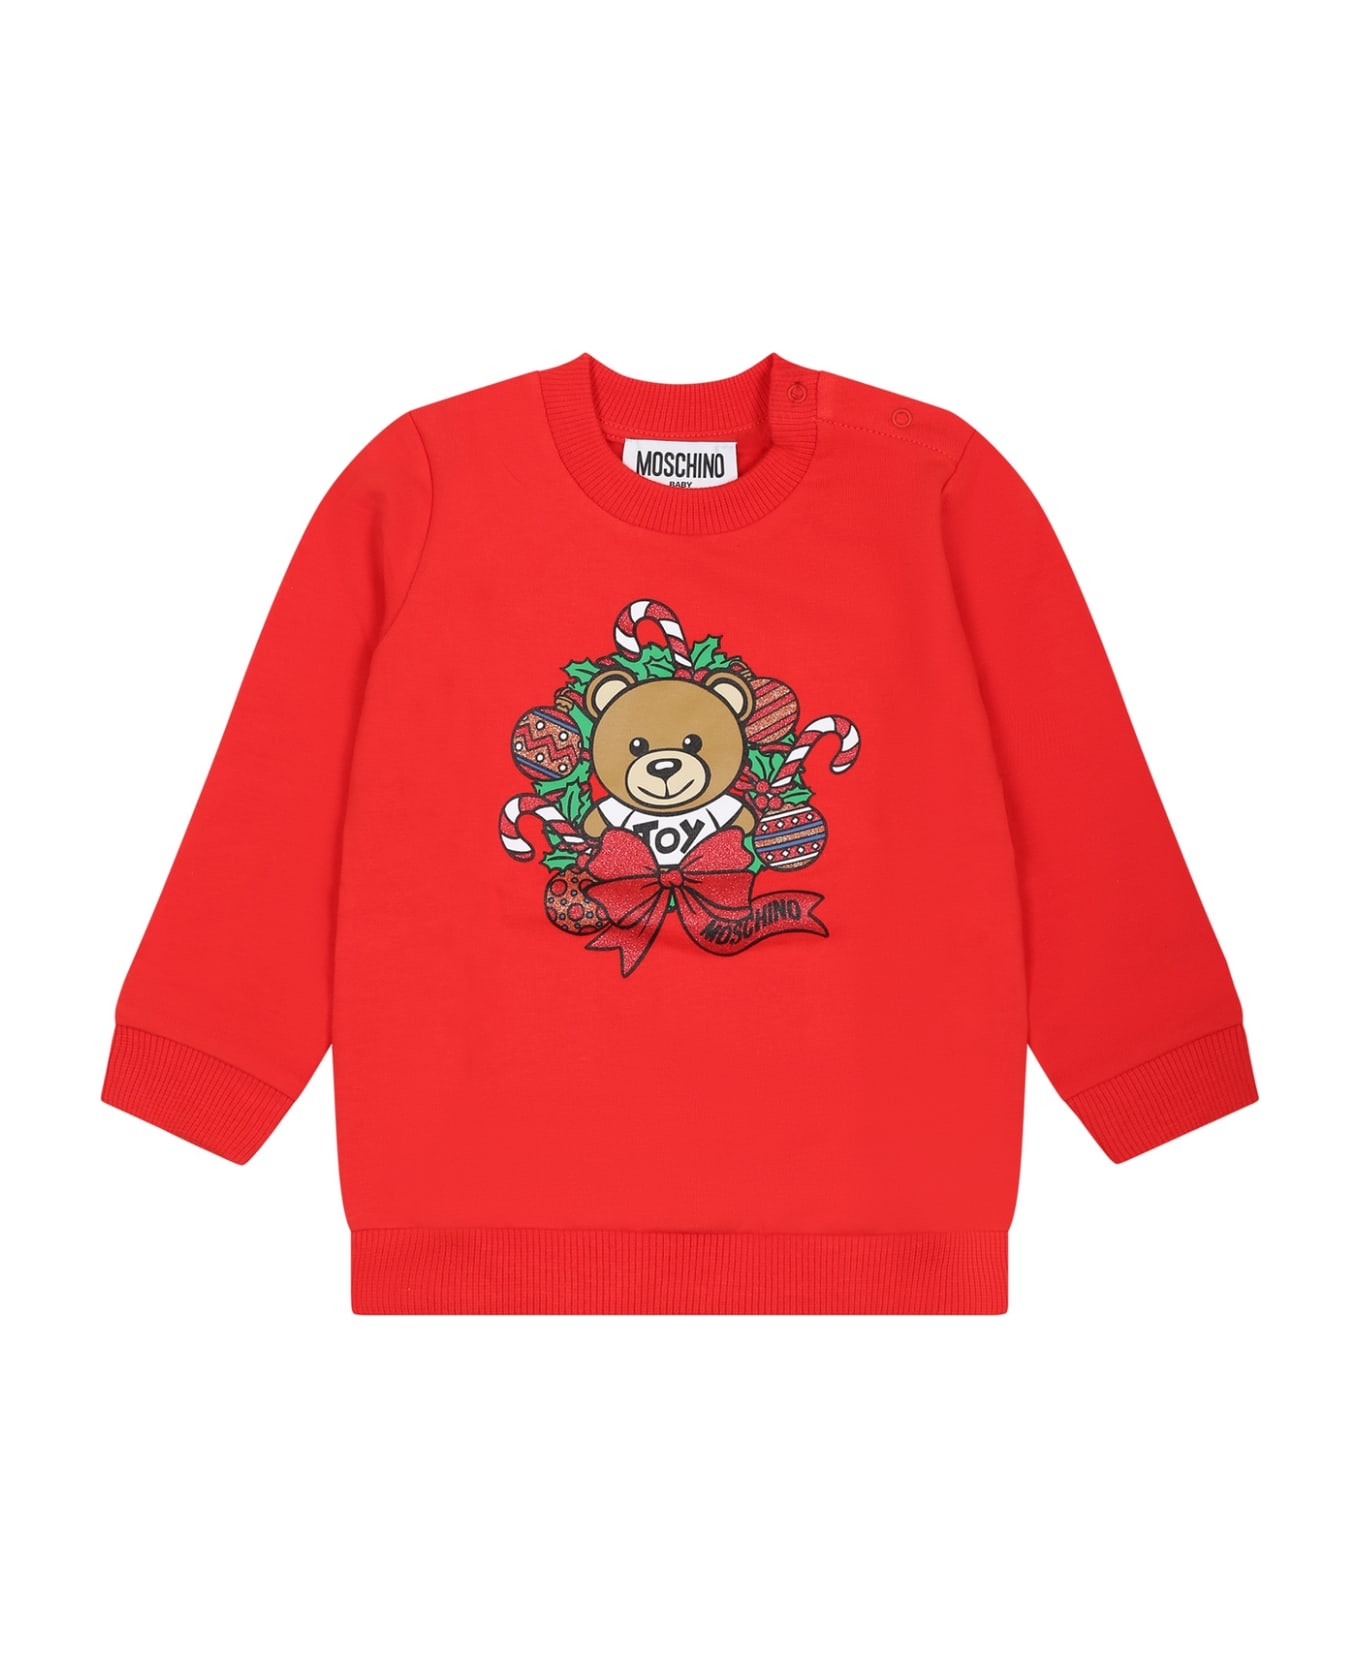 Moschino Red Sweatshirt For Baby Kids With Teddy Bear And Logo - Red